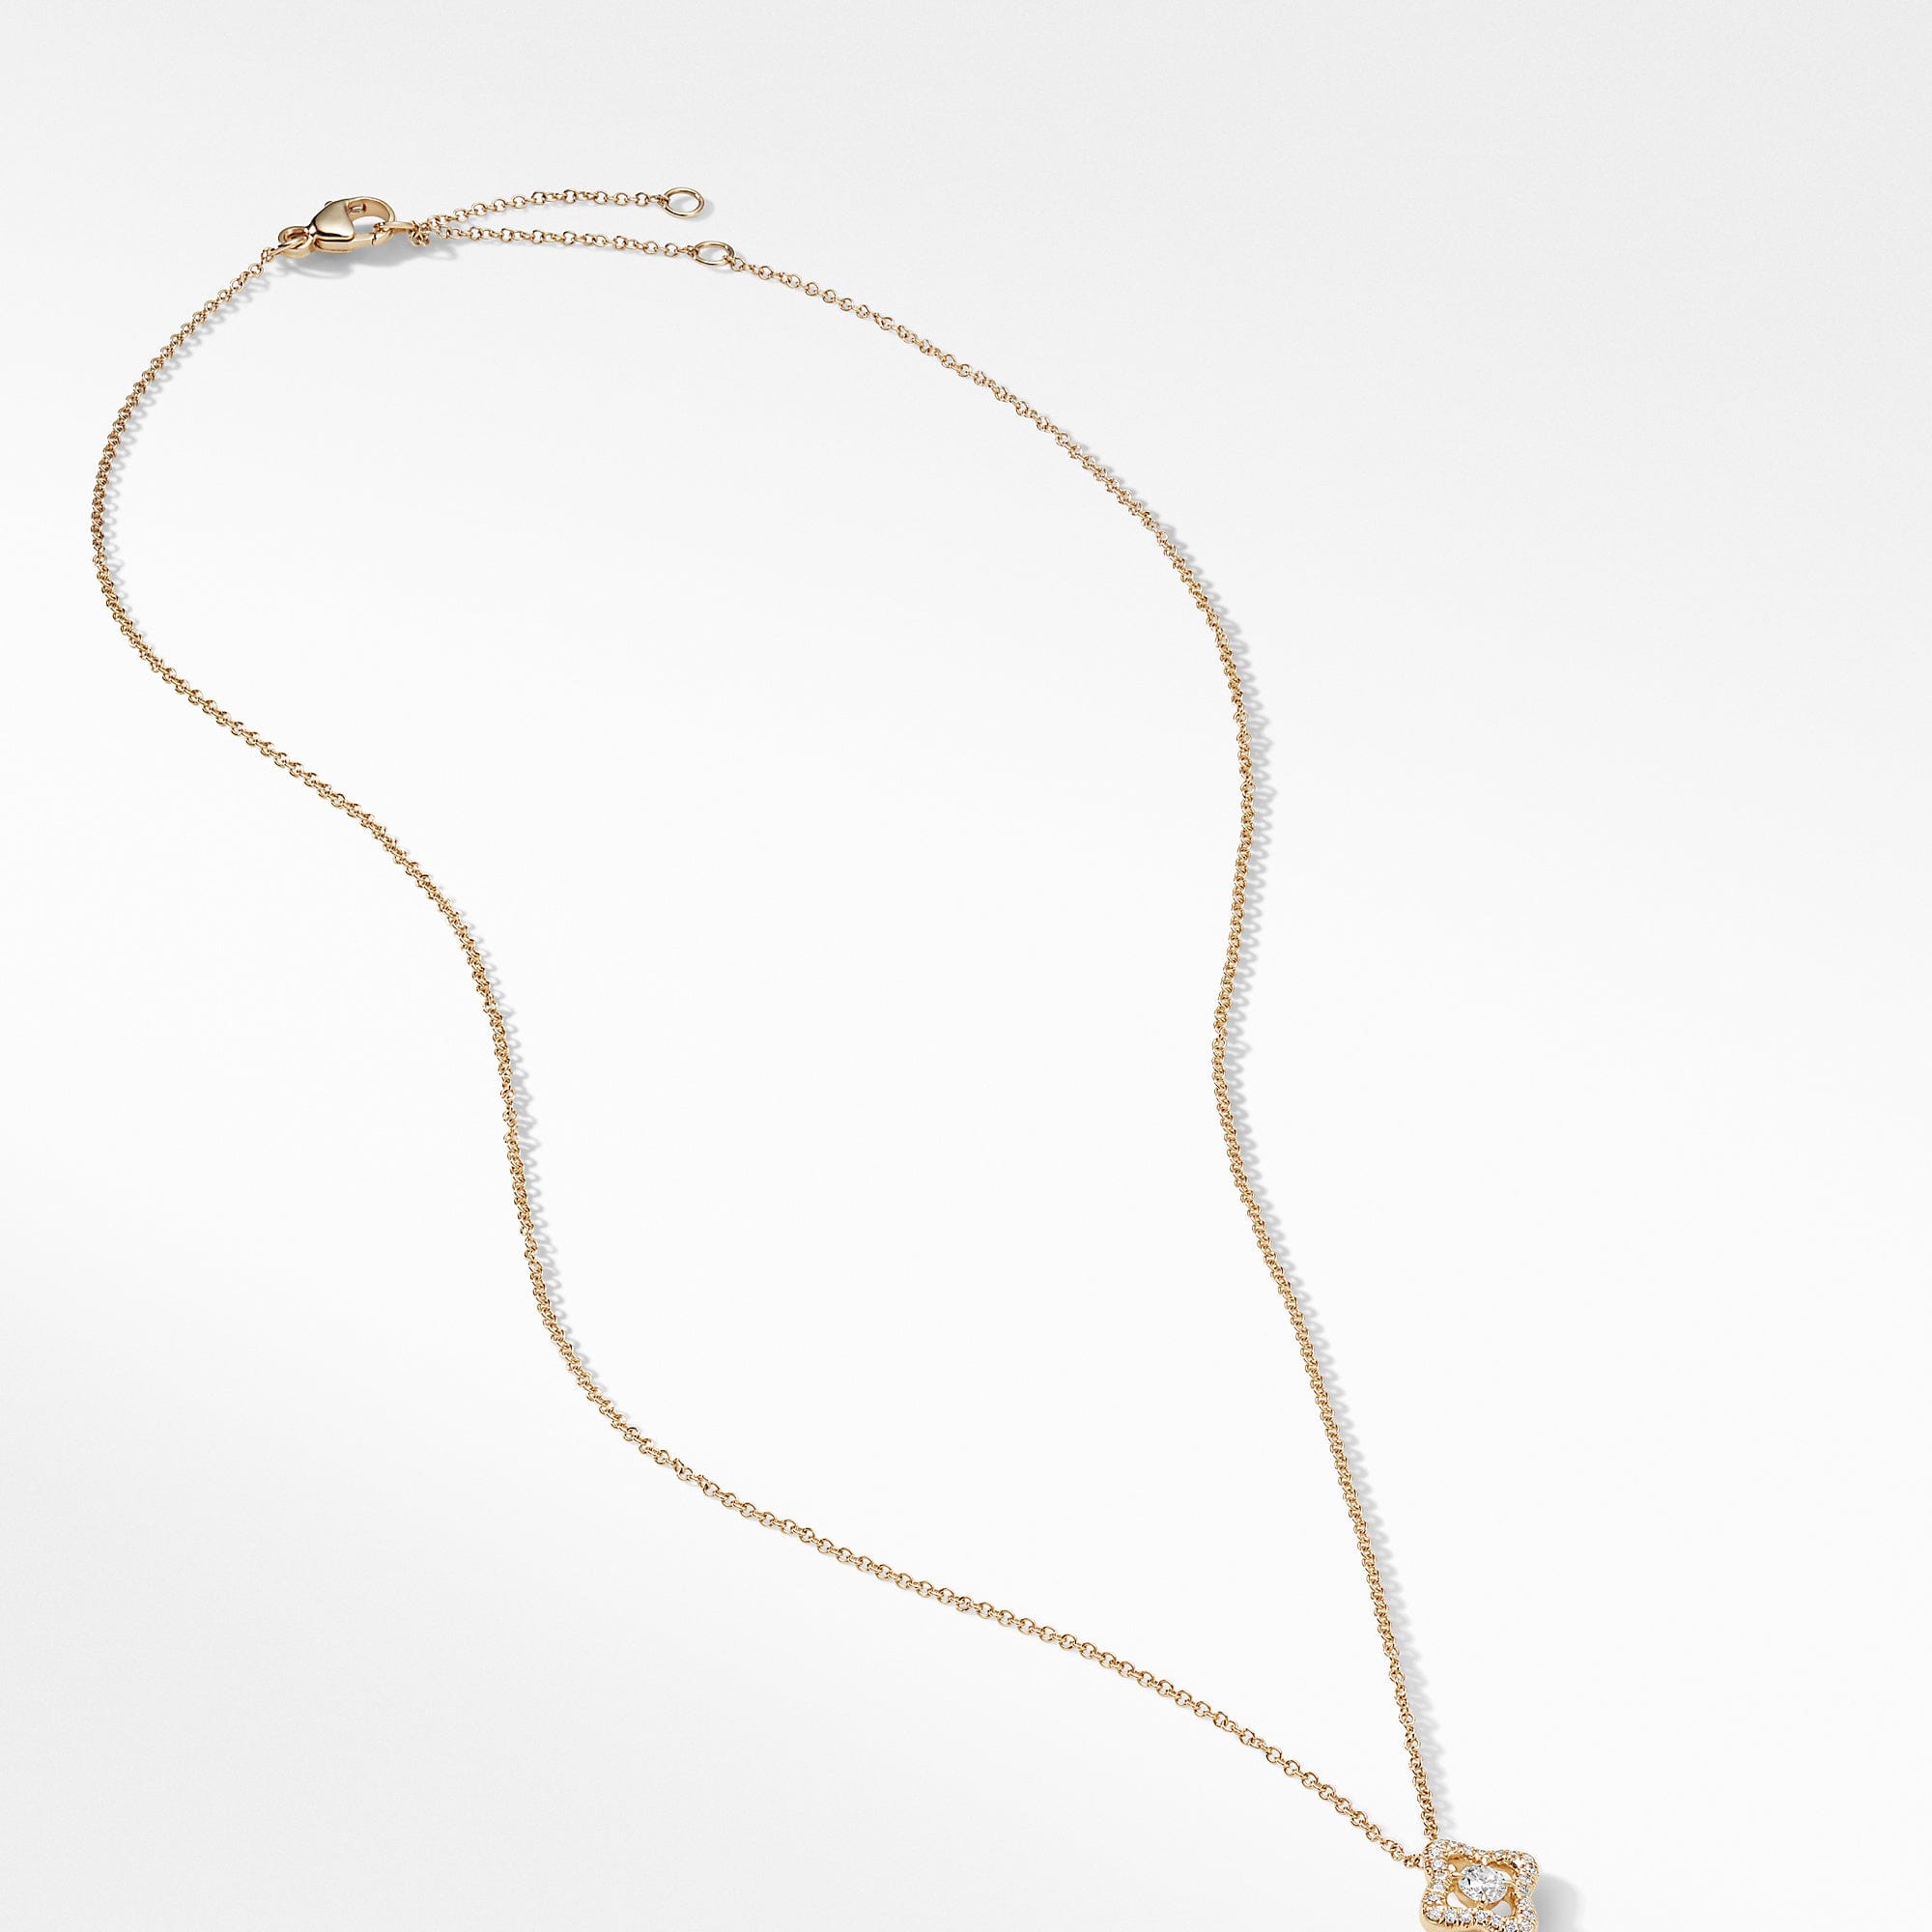 Necklace with Diamonds in 18K Gold